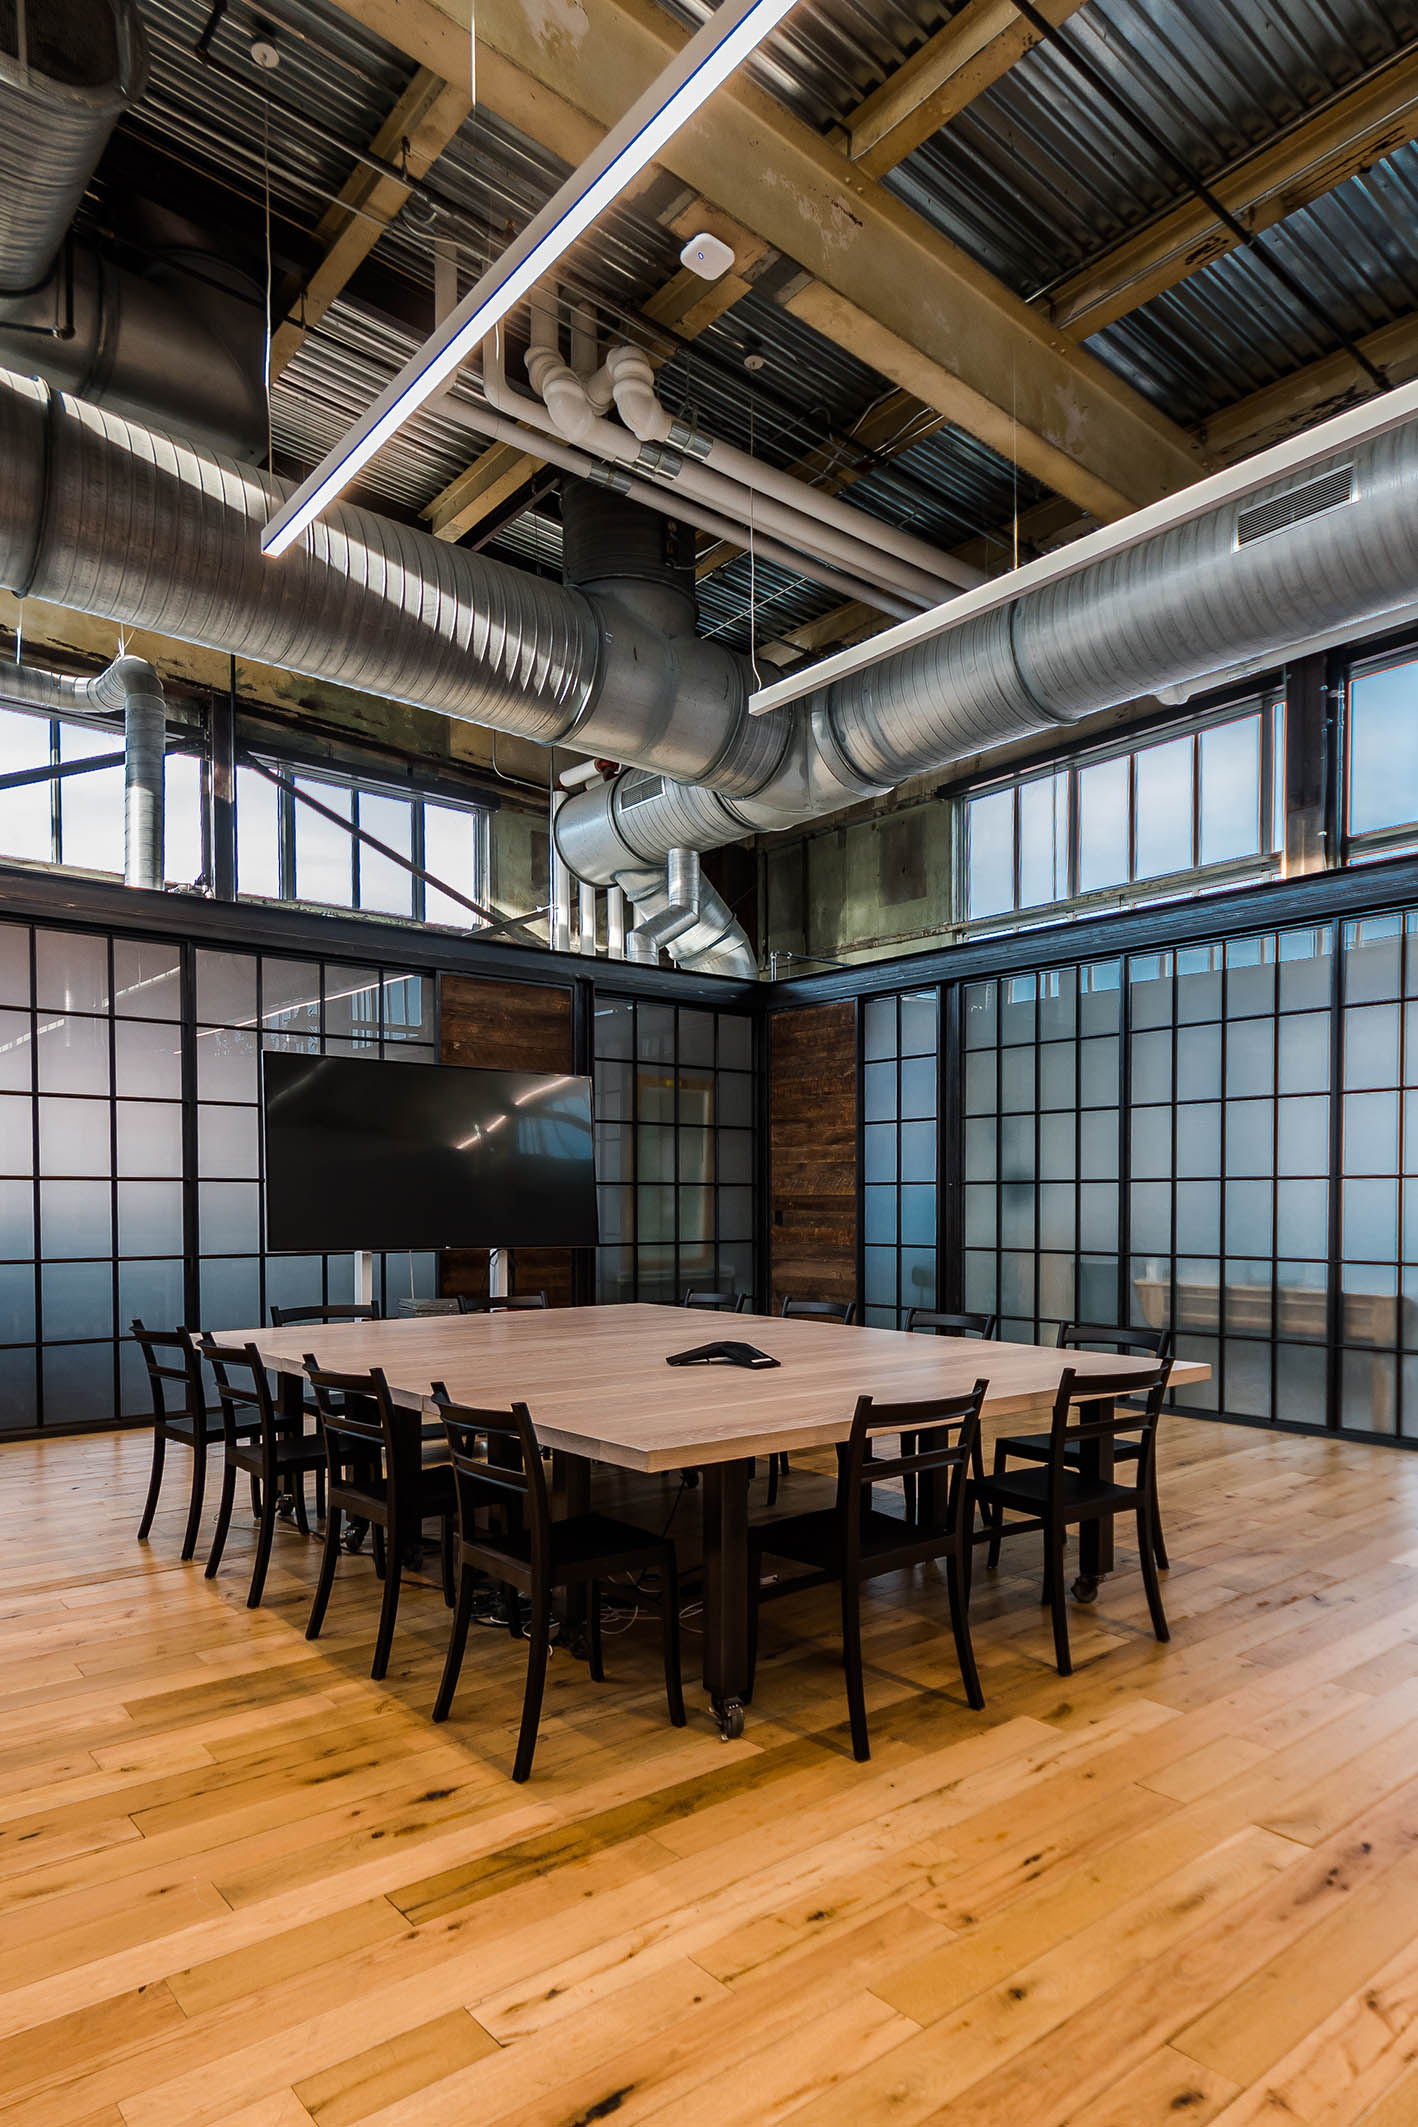 NewStudio Architecture collaborated with URBN to design the Terrain meeting area in the adaptive reuse of the Navy Yard Building 18 Annex